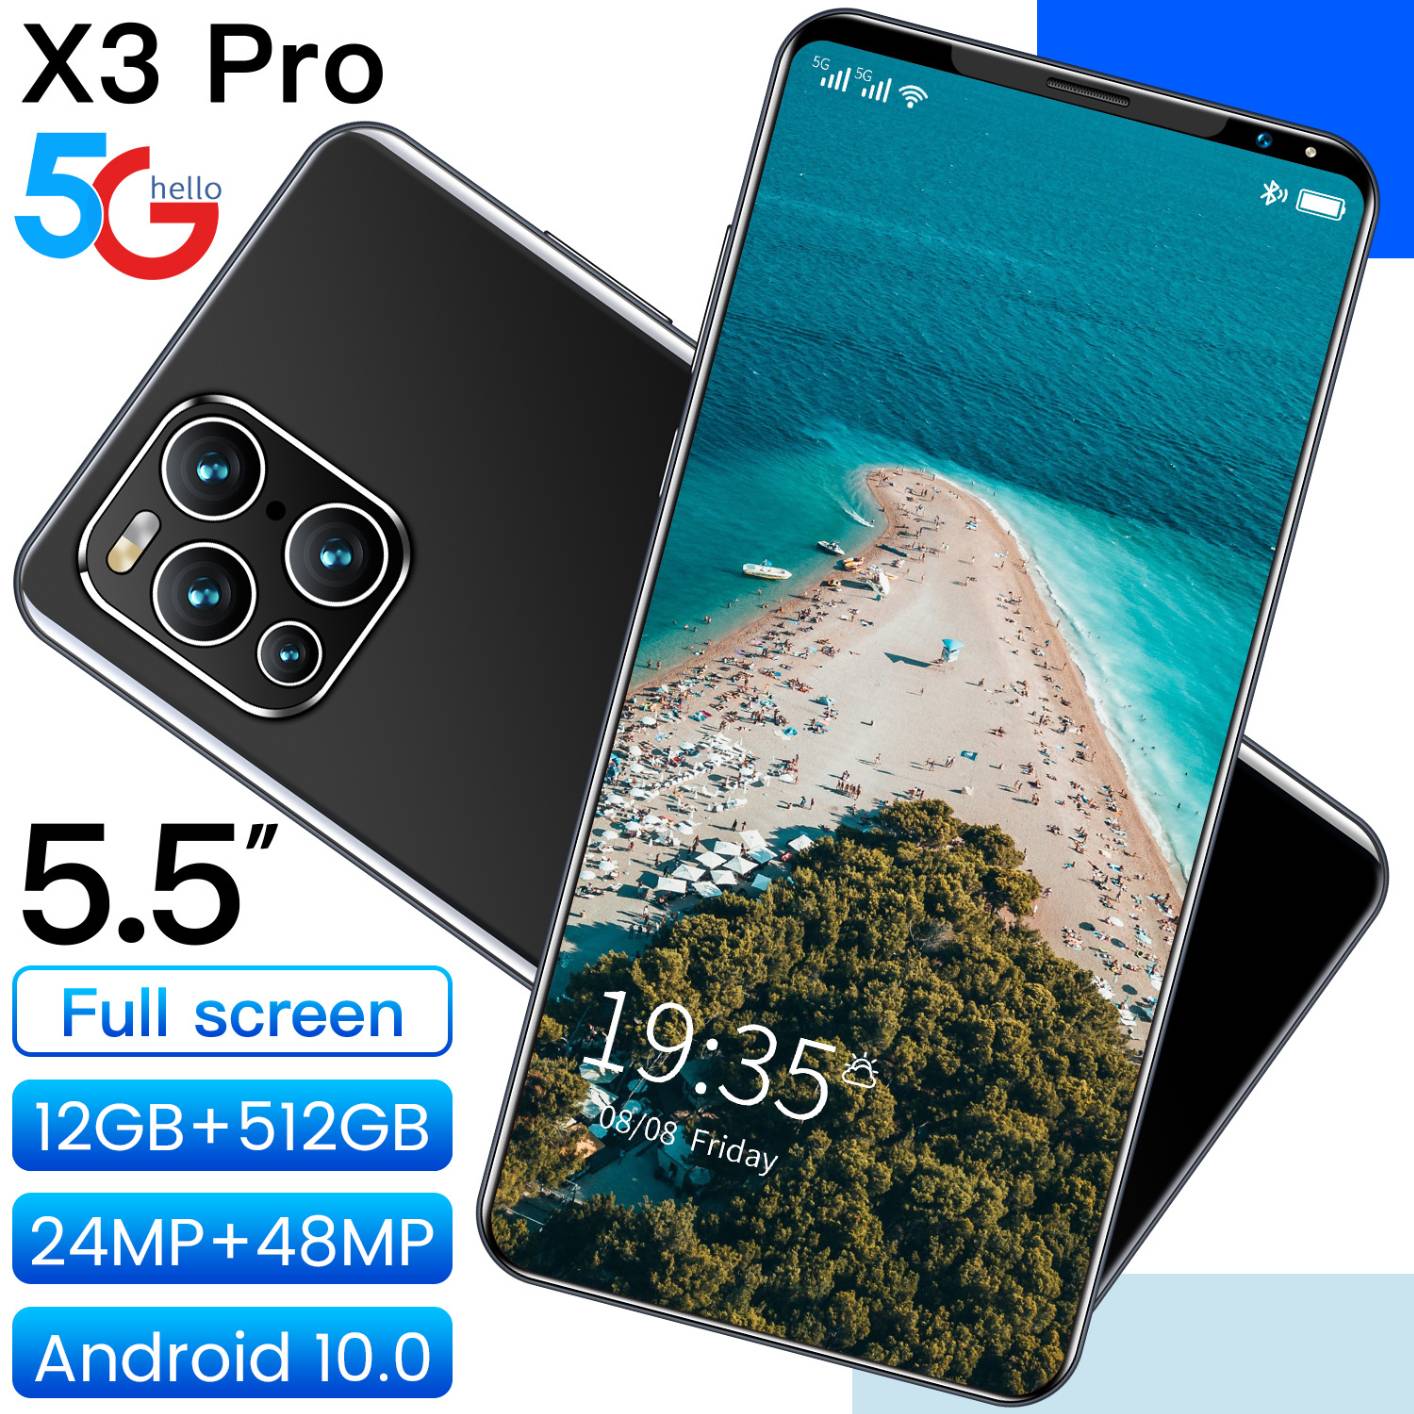 x3 pro 5.5 inch Android smartphone